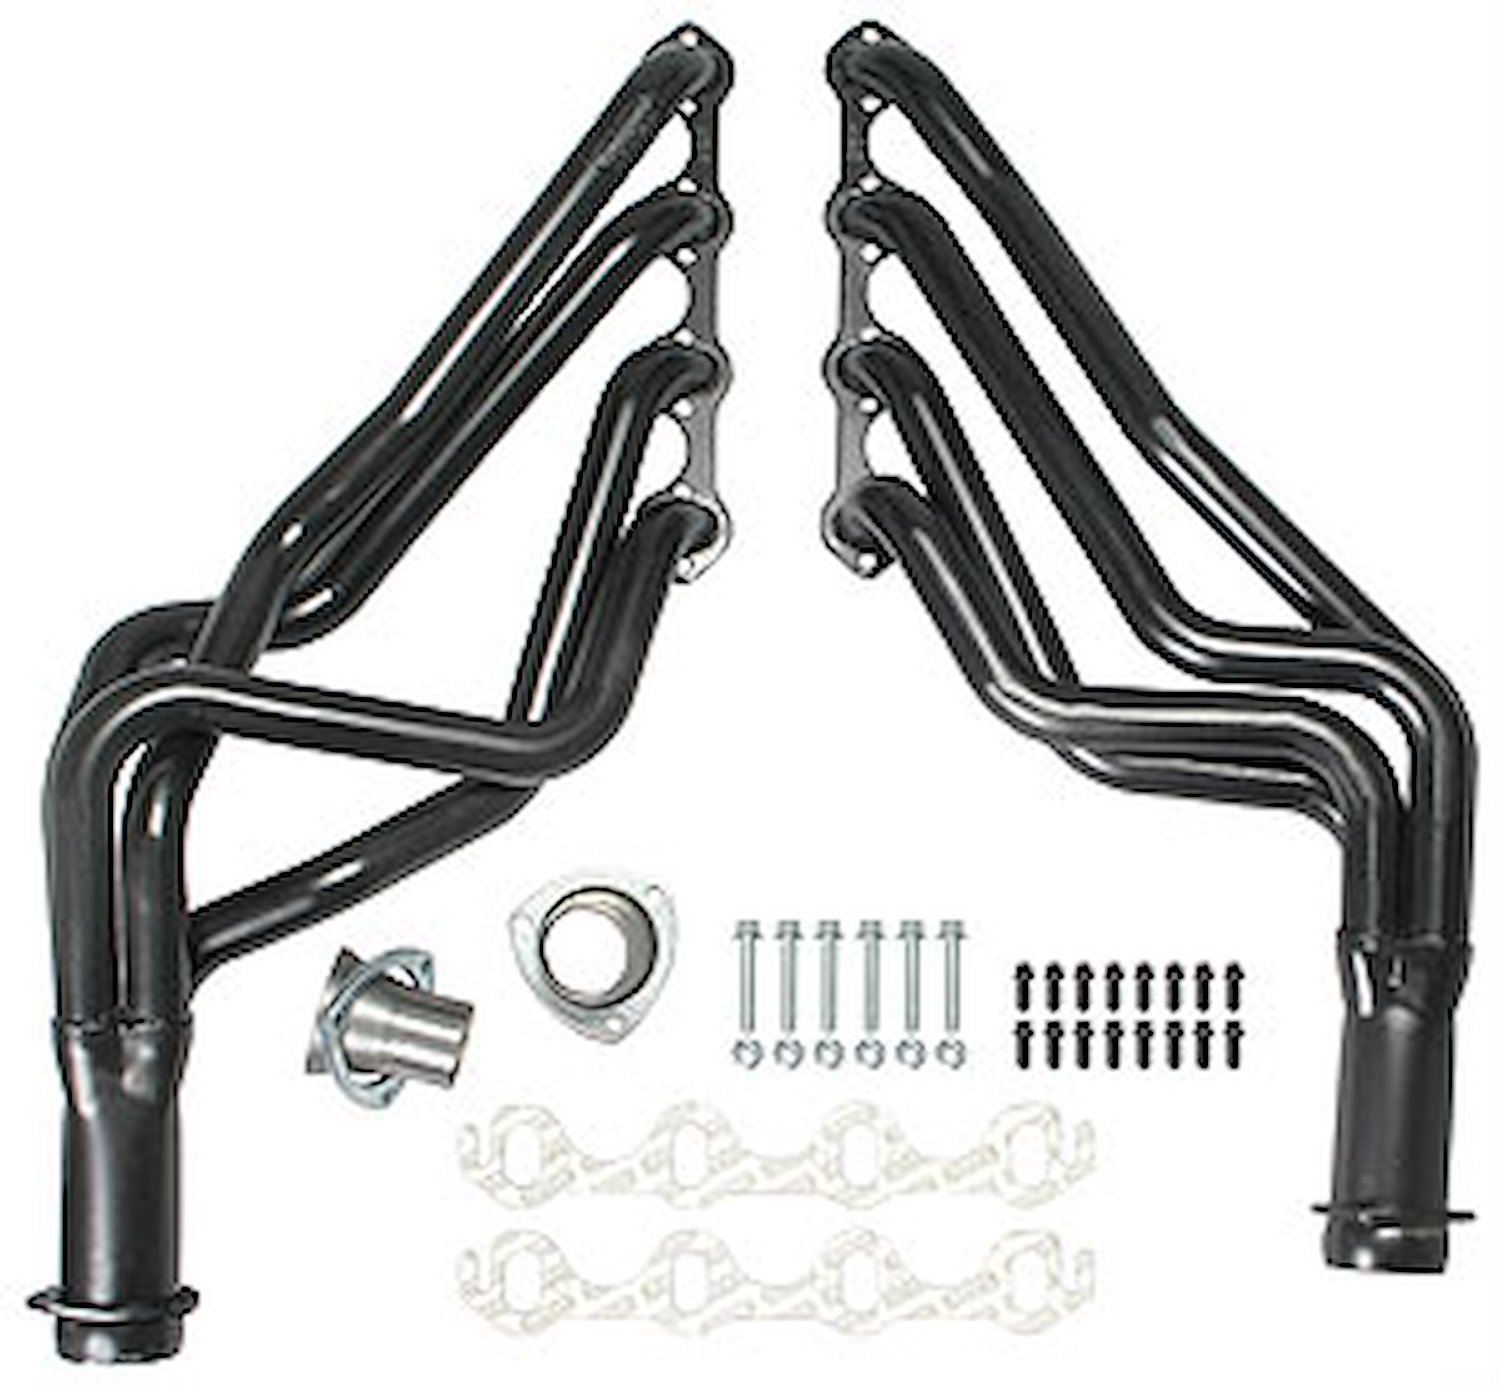 Standard Duty Uncoated Headers for 1964-73 Ford Multiple Applications